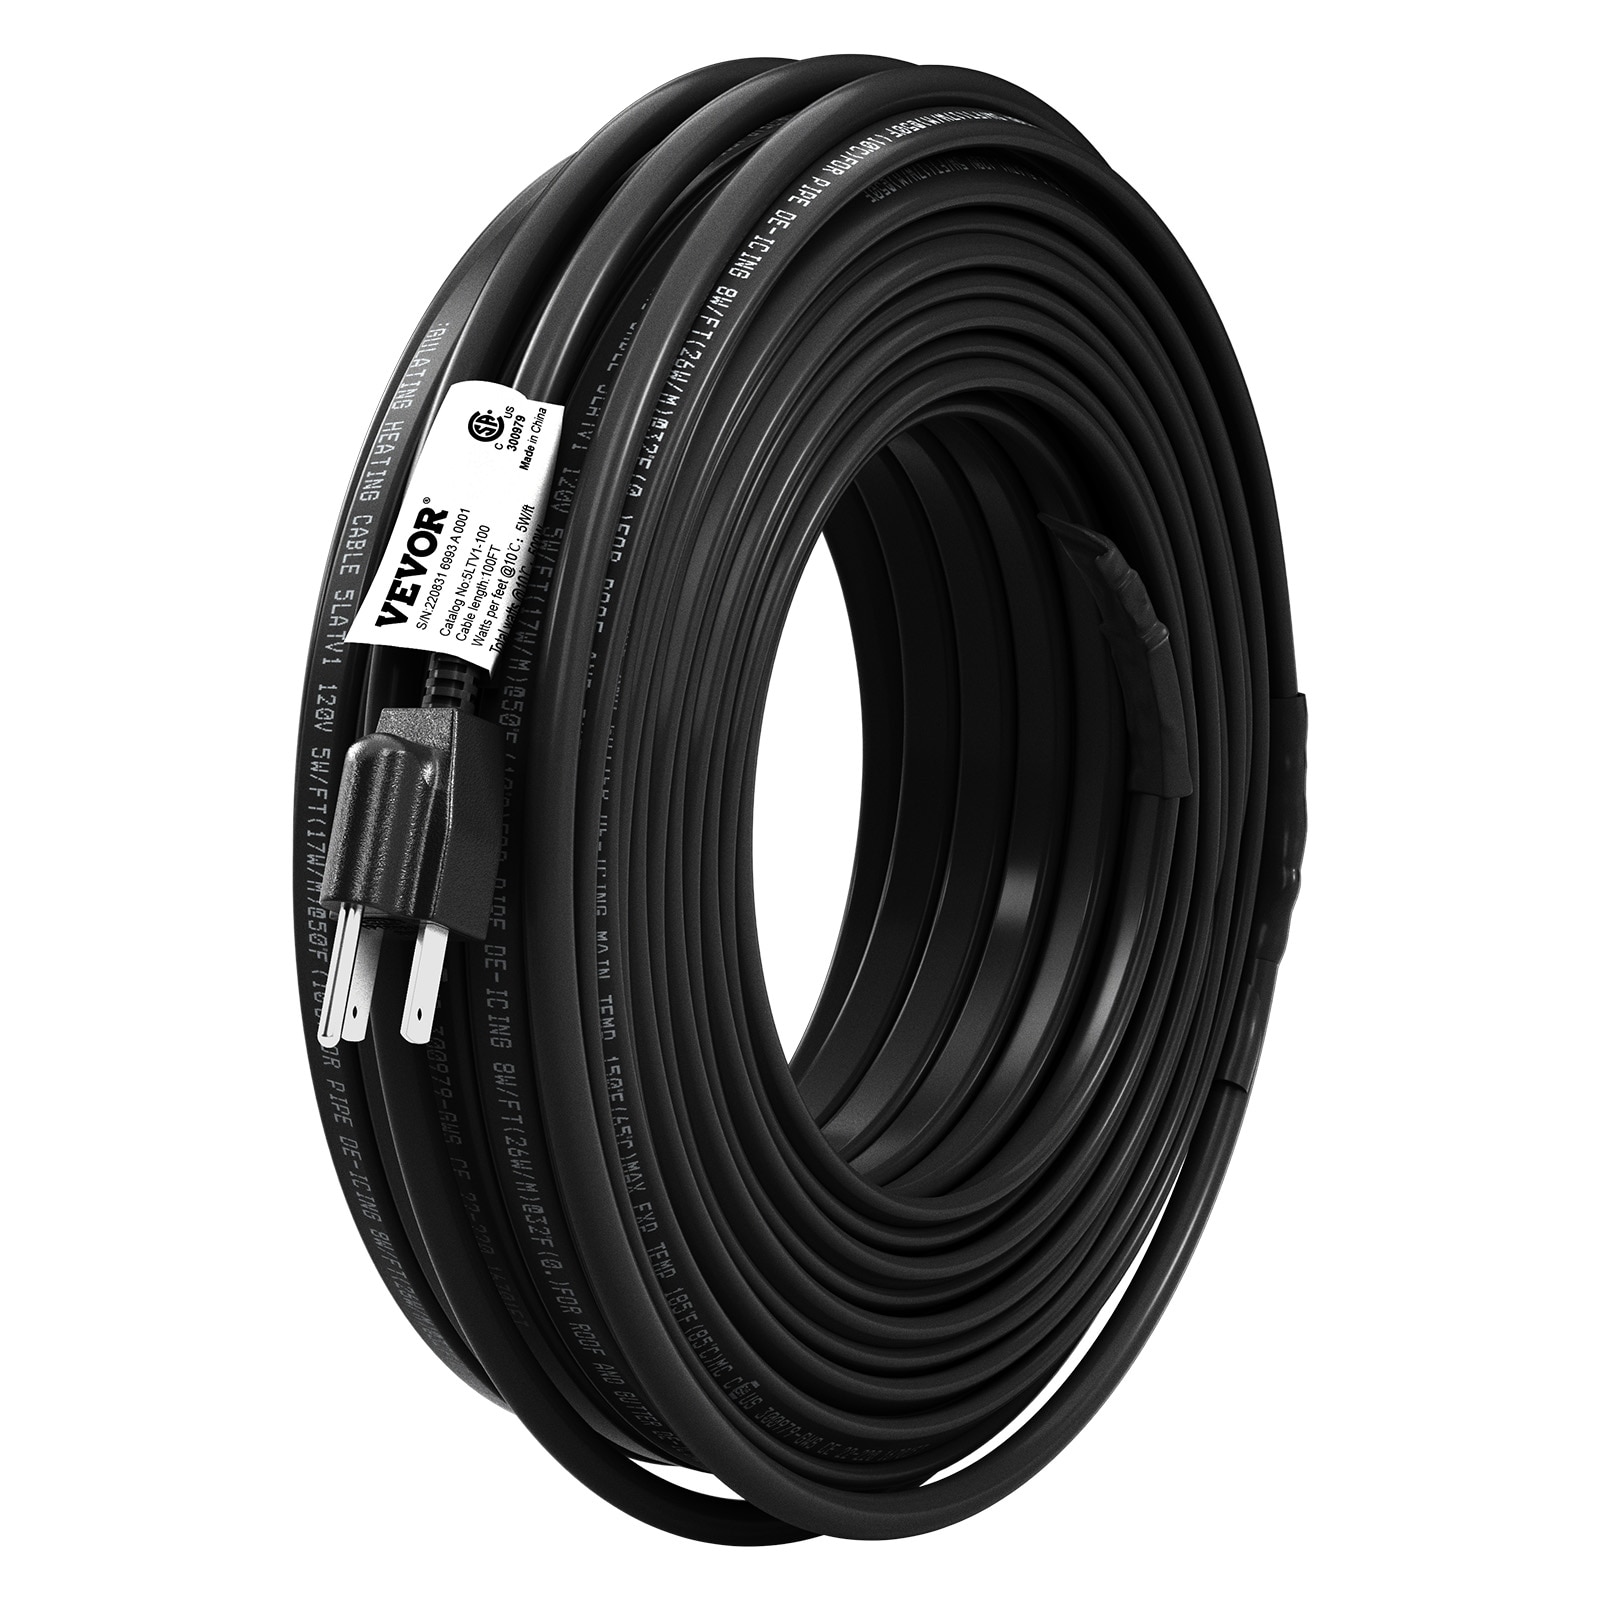 VEVOR 30 ft. Pipe Heat Cable 5W/ft. Self-Regulating Heat Tape IP68